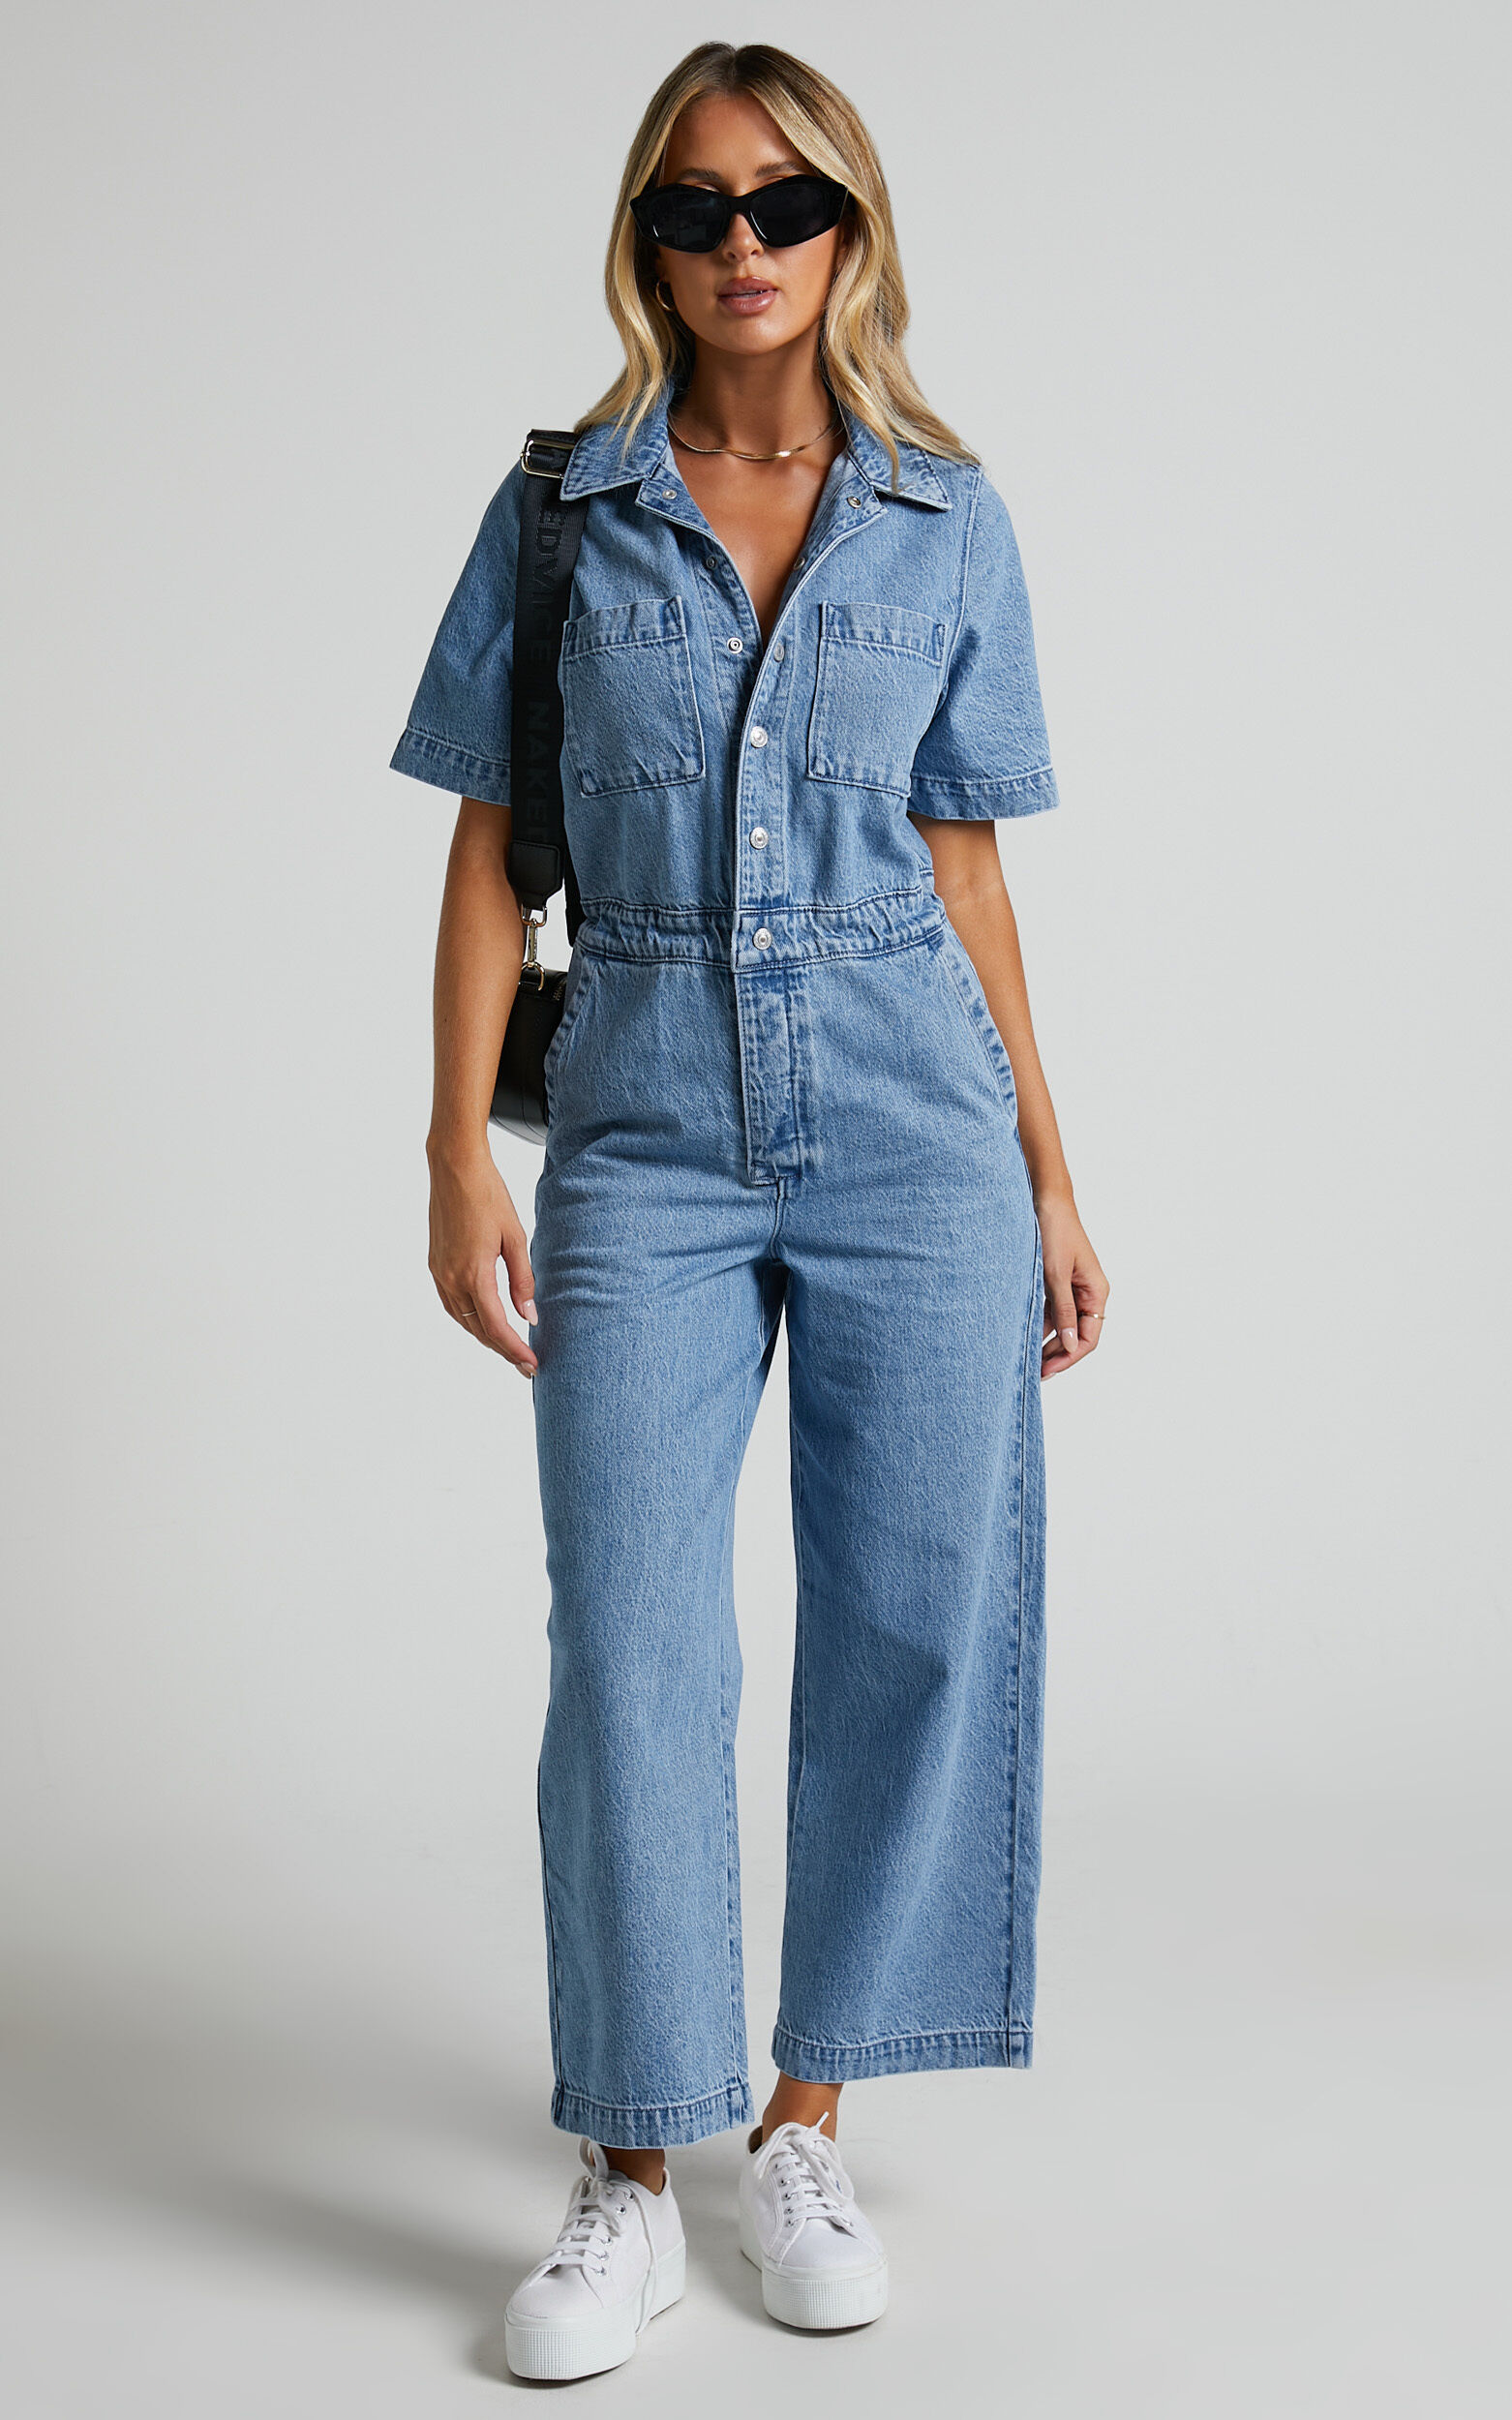 Levi's - SS BOILERSUIT in More Money More Problems | Showpo USA